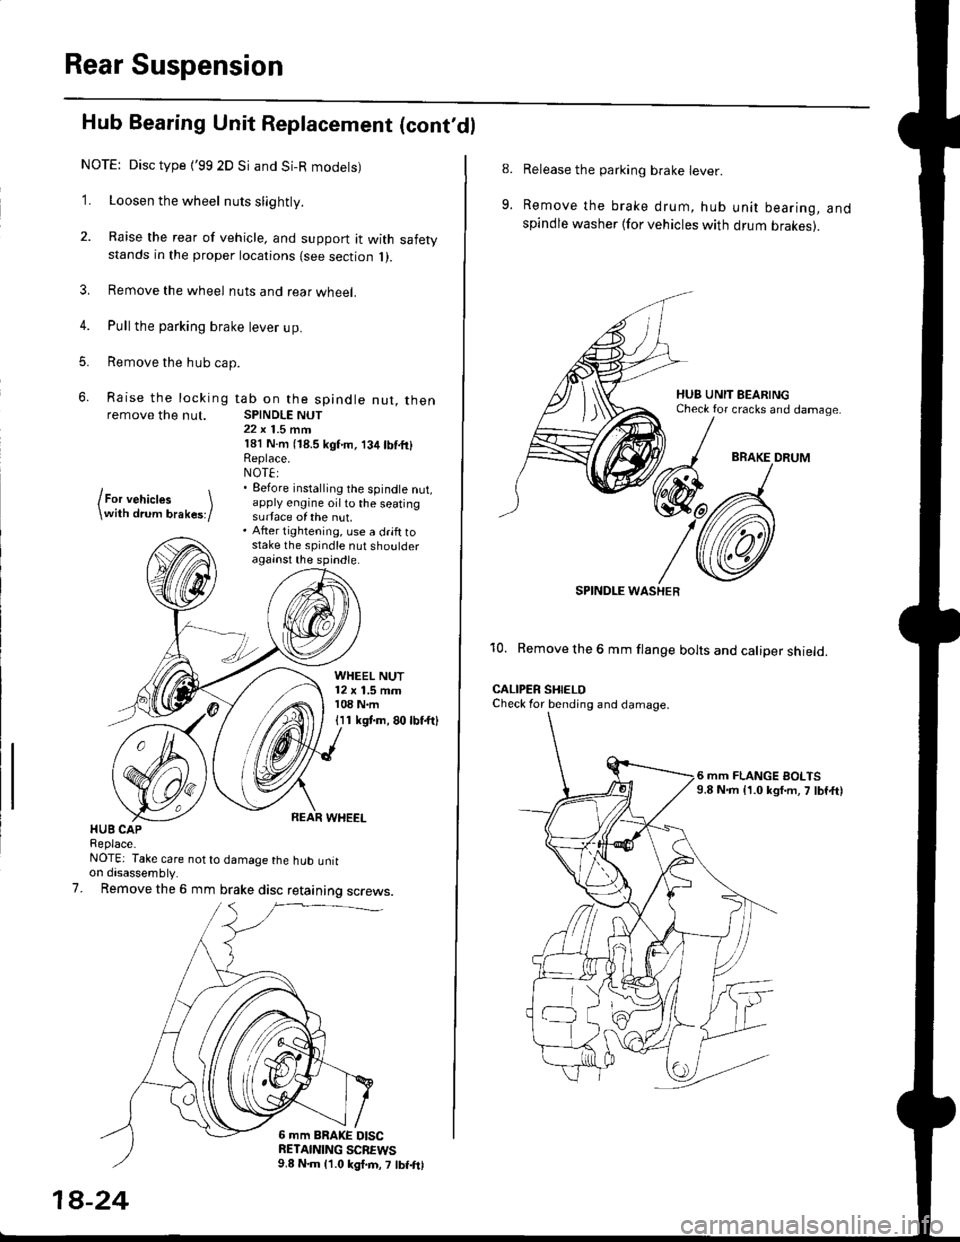 HONDA CIVIC 1996 6.G Workshop Manual Rear Suspension
Hub Bearing Unit Replacement (contdl
NOTE: Disc type {99 2D Si and Si-R modets)
1. Loosen the wheel nuts slightly.
2. Raise the rear of vehicle, and support it with safetystands in t